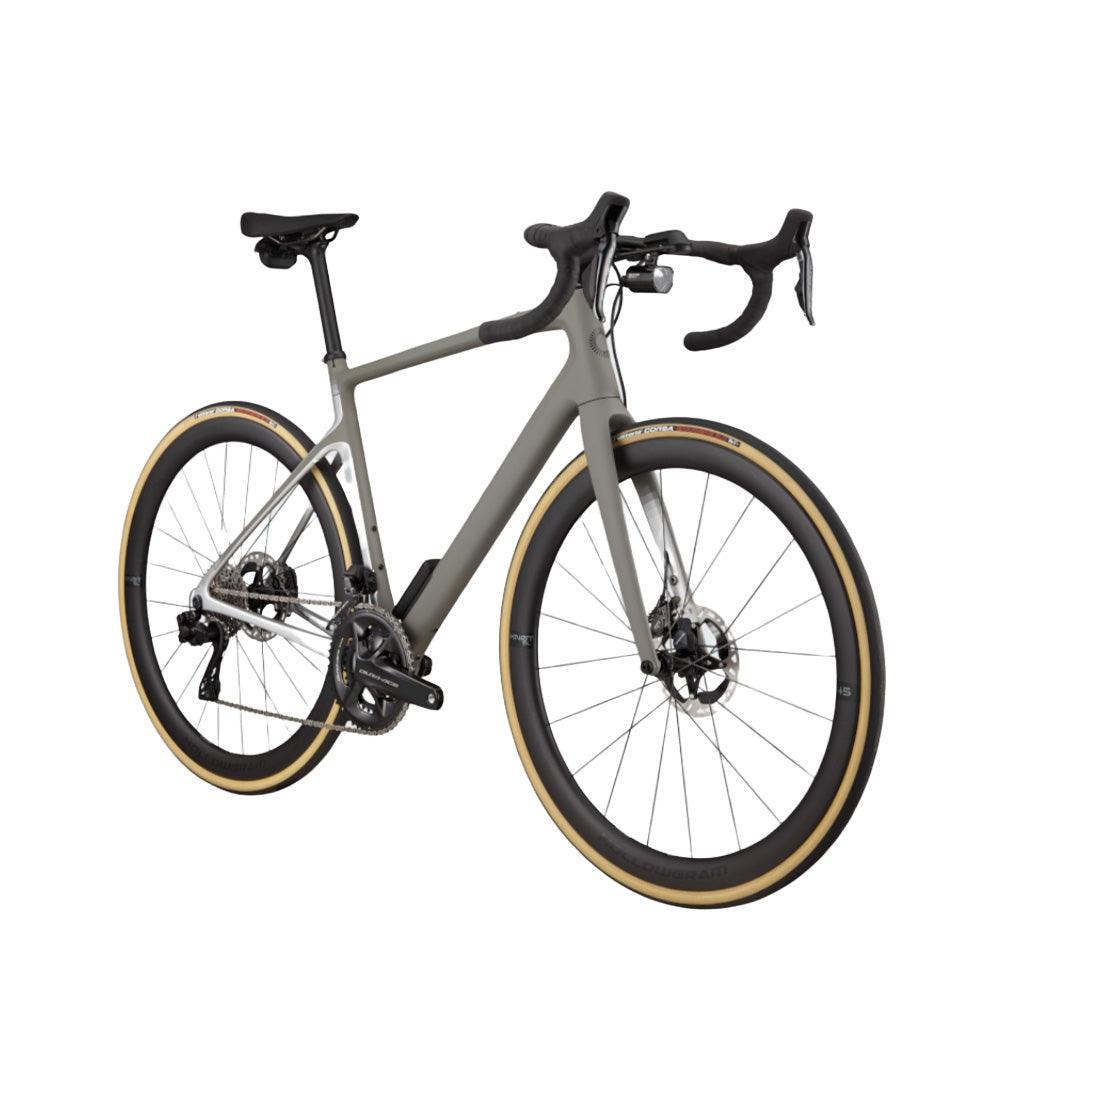 Synapse Carbon 1 RLE - Strictly Bicycles